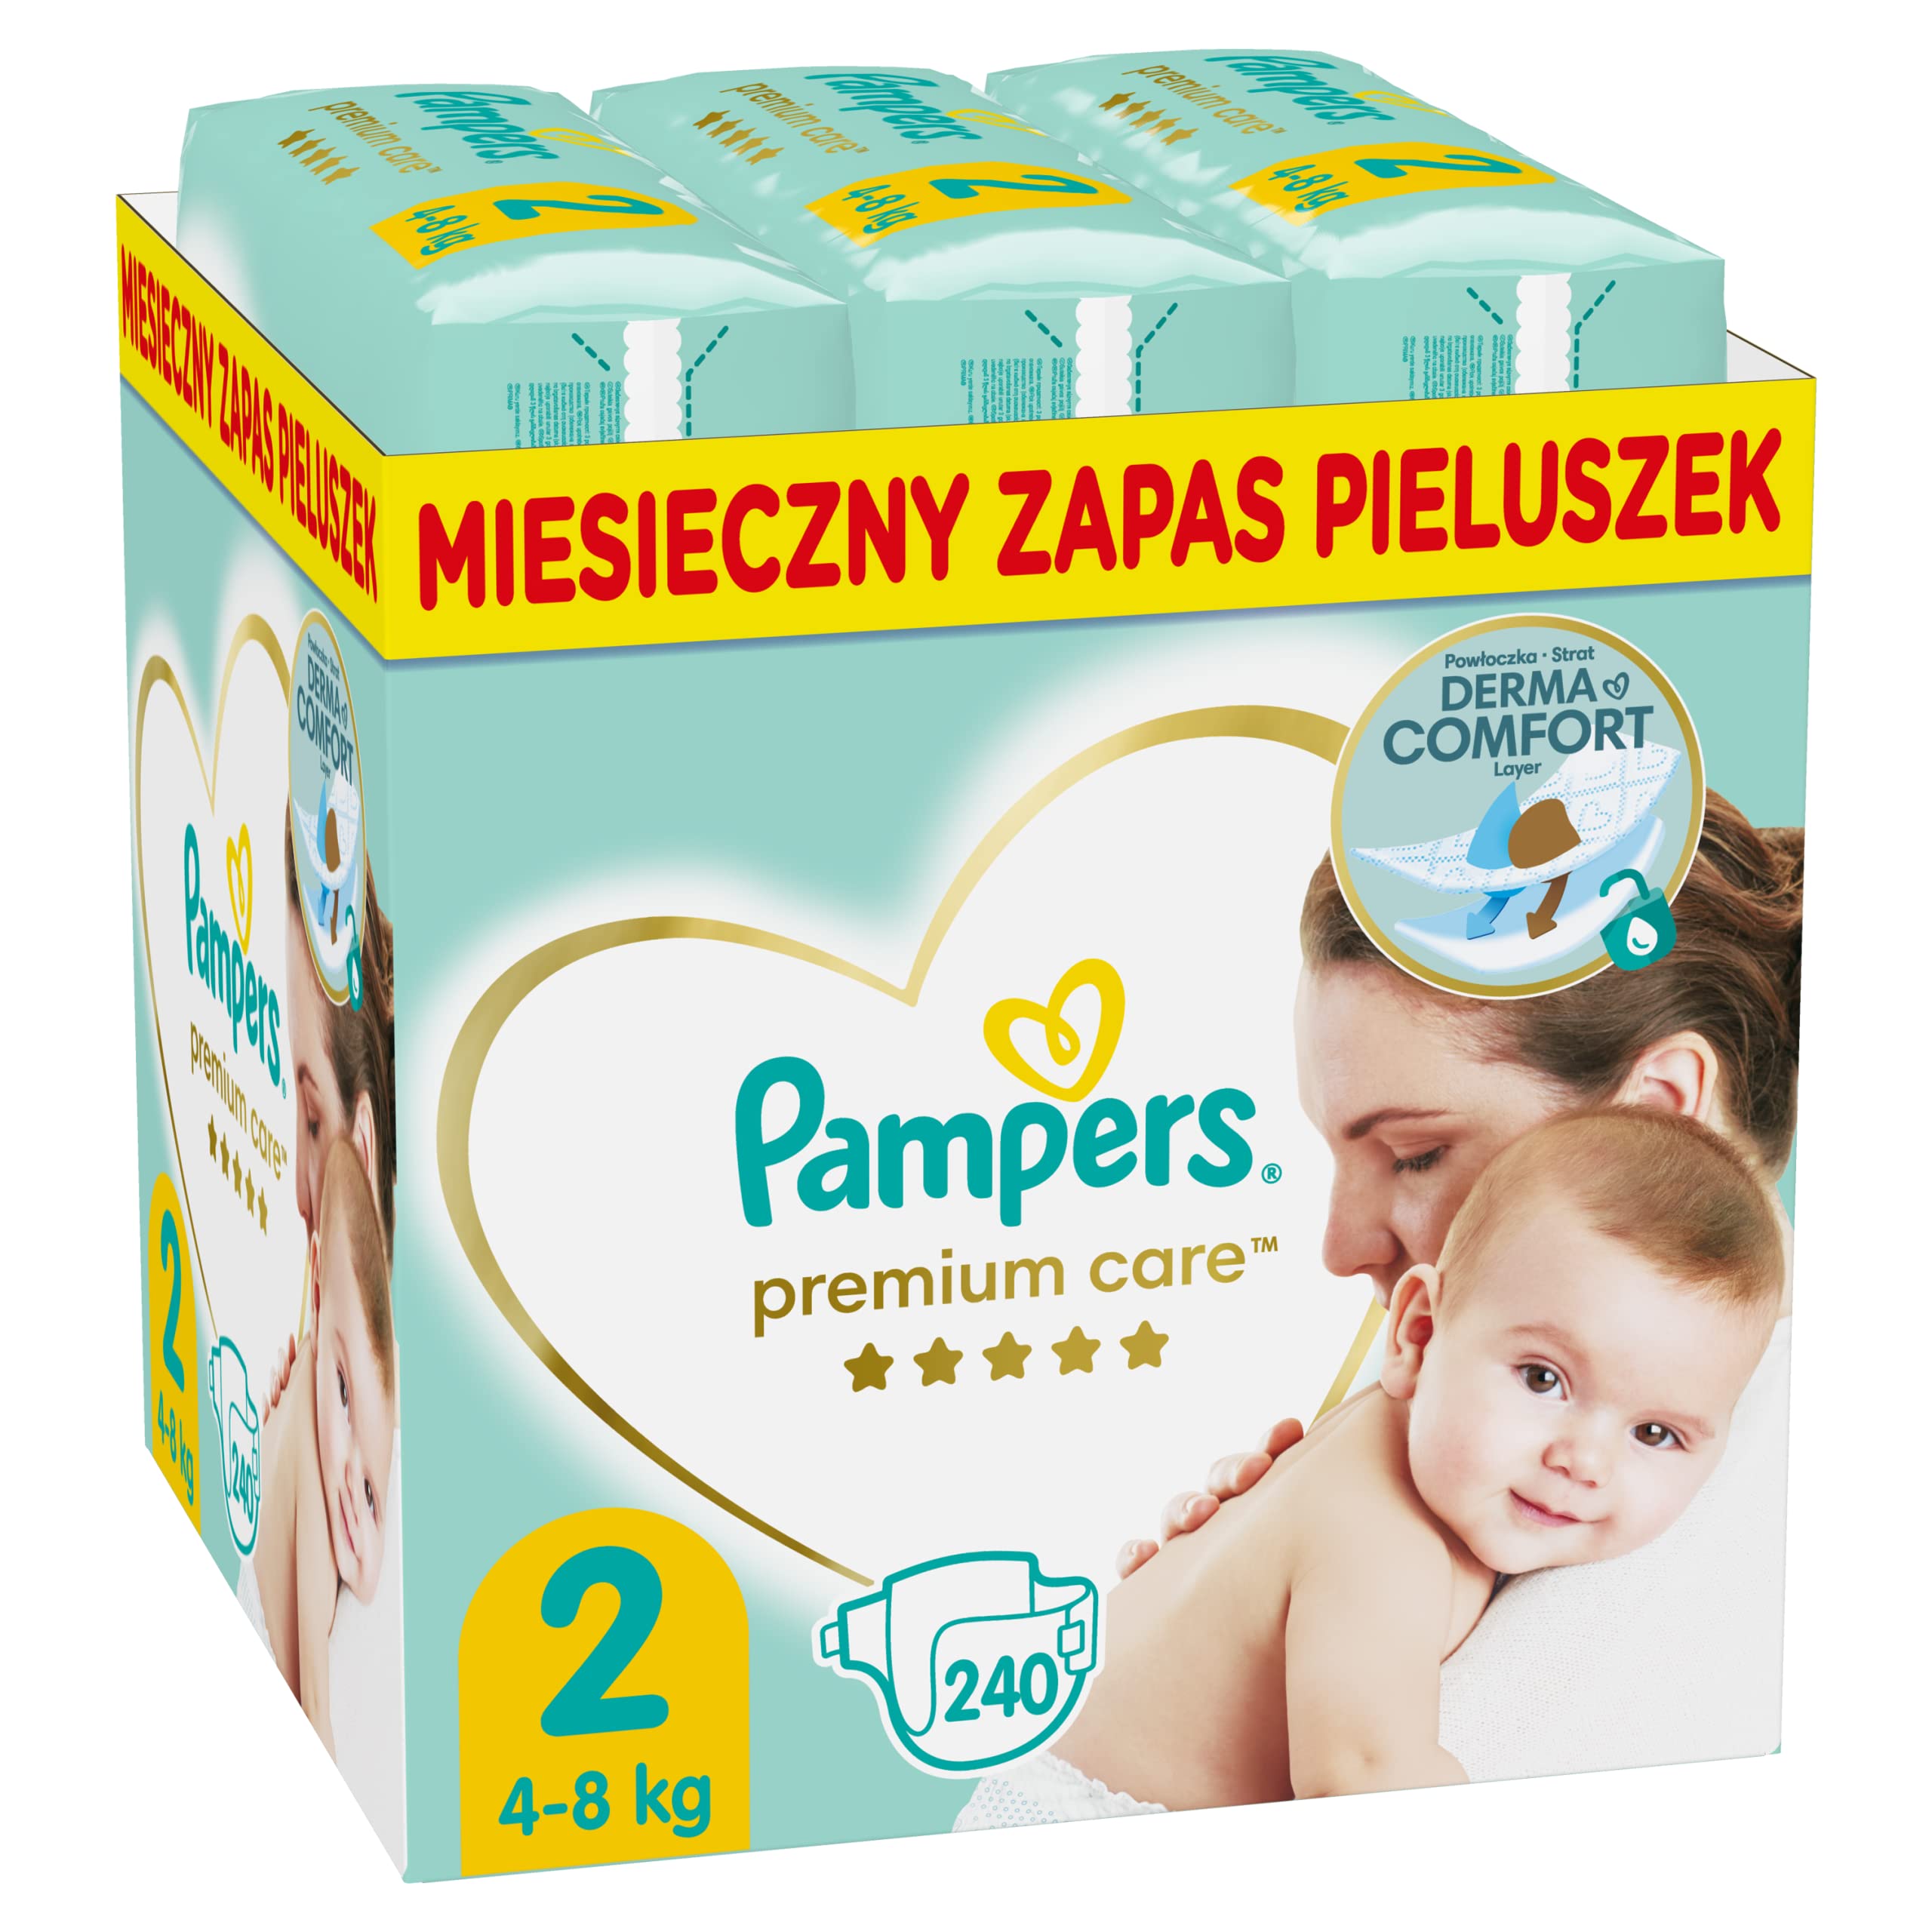 pampers 5 ceny